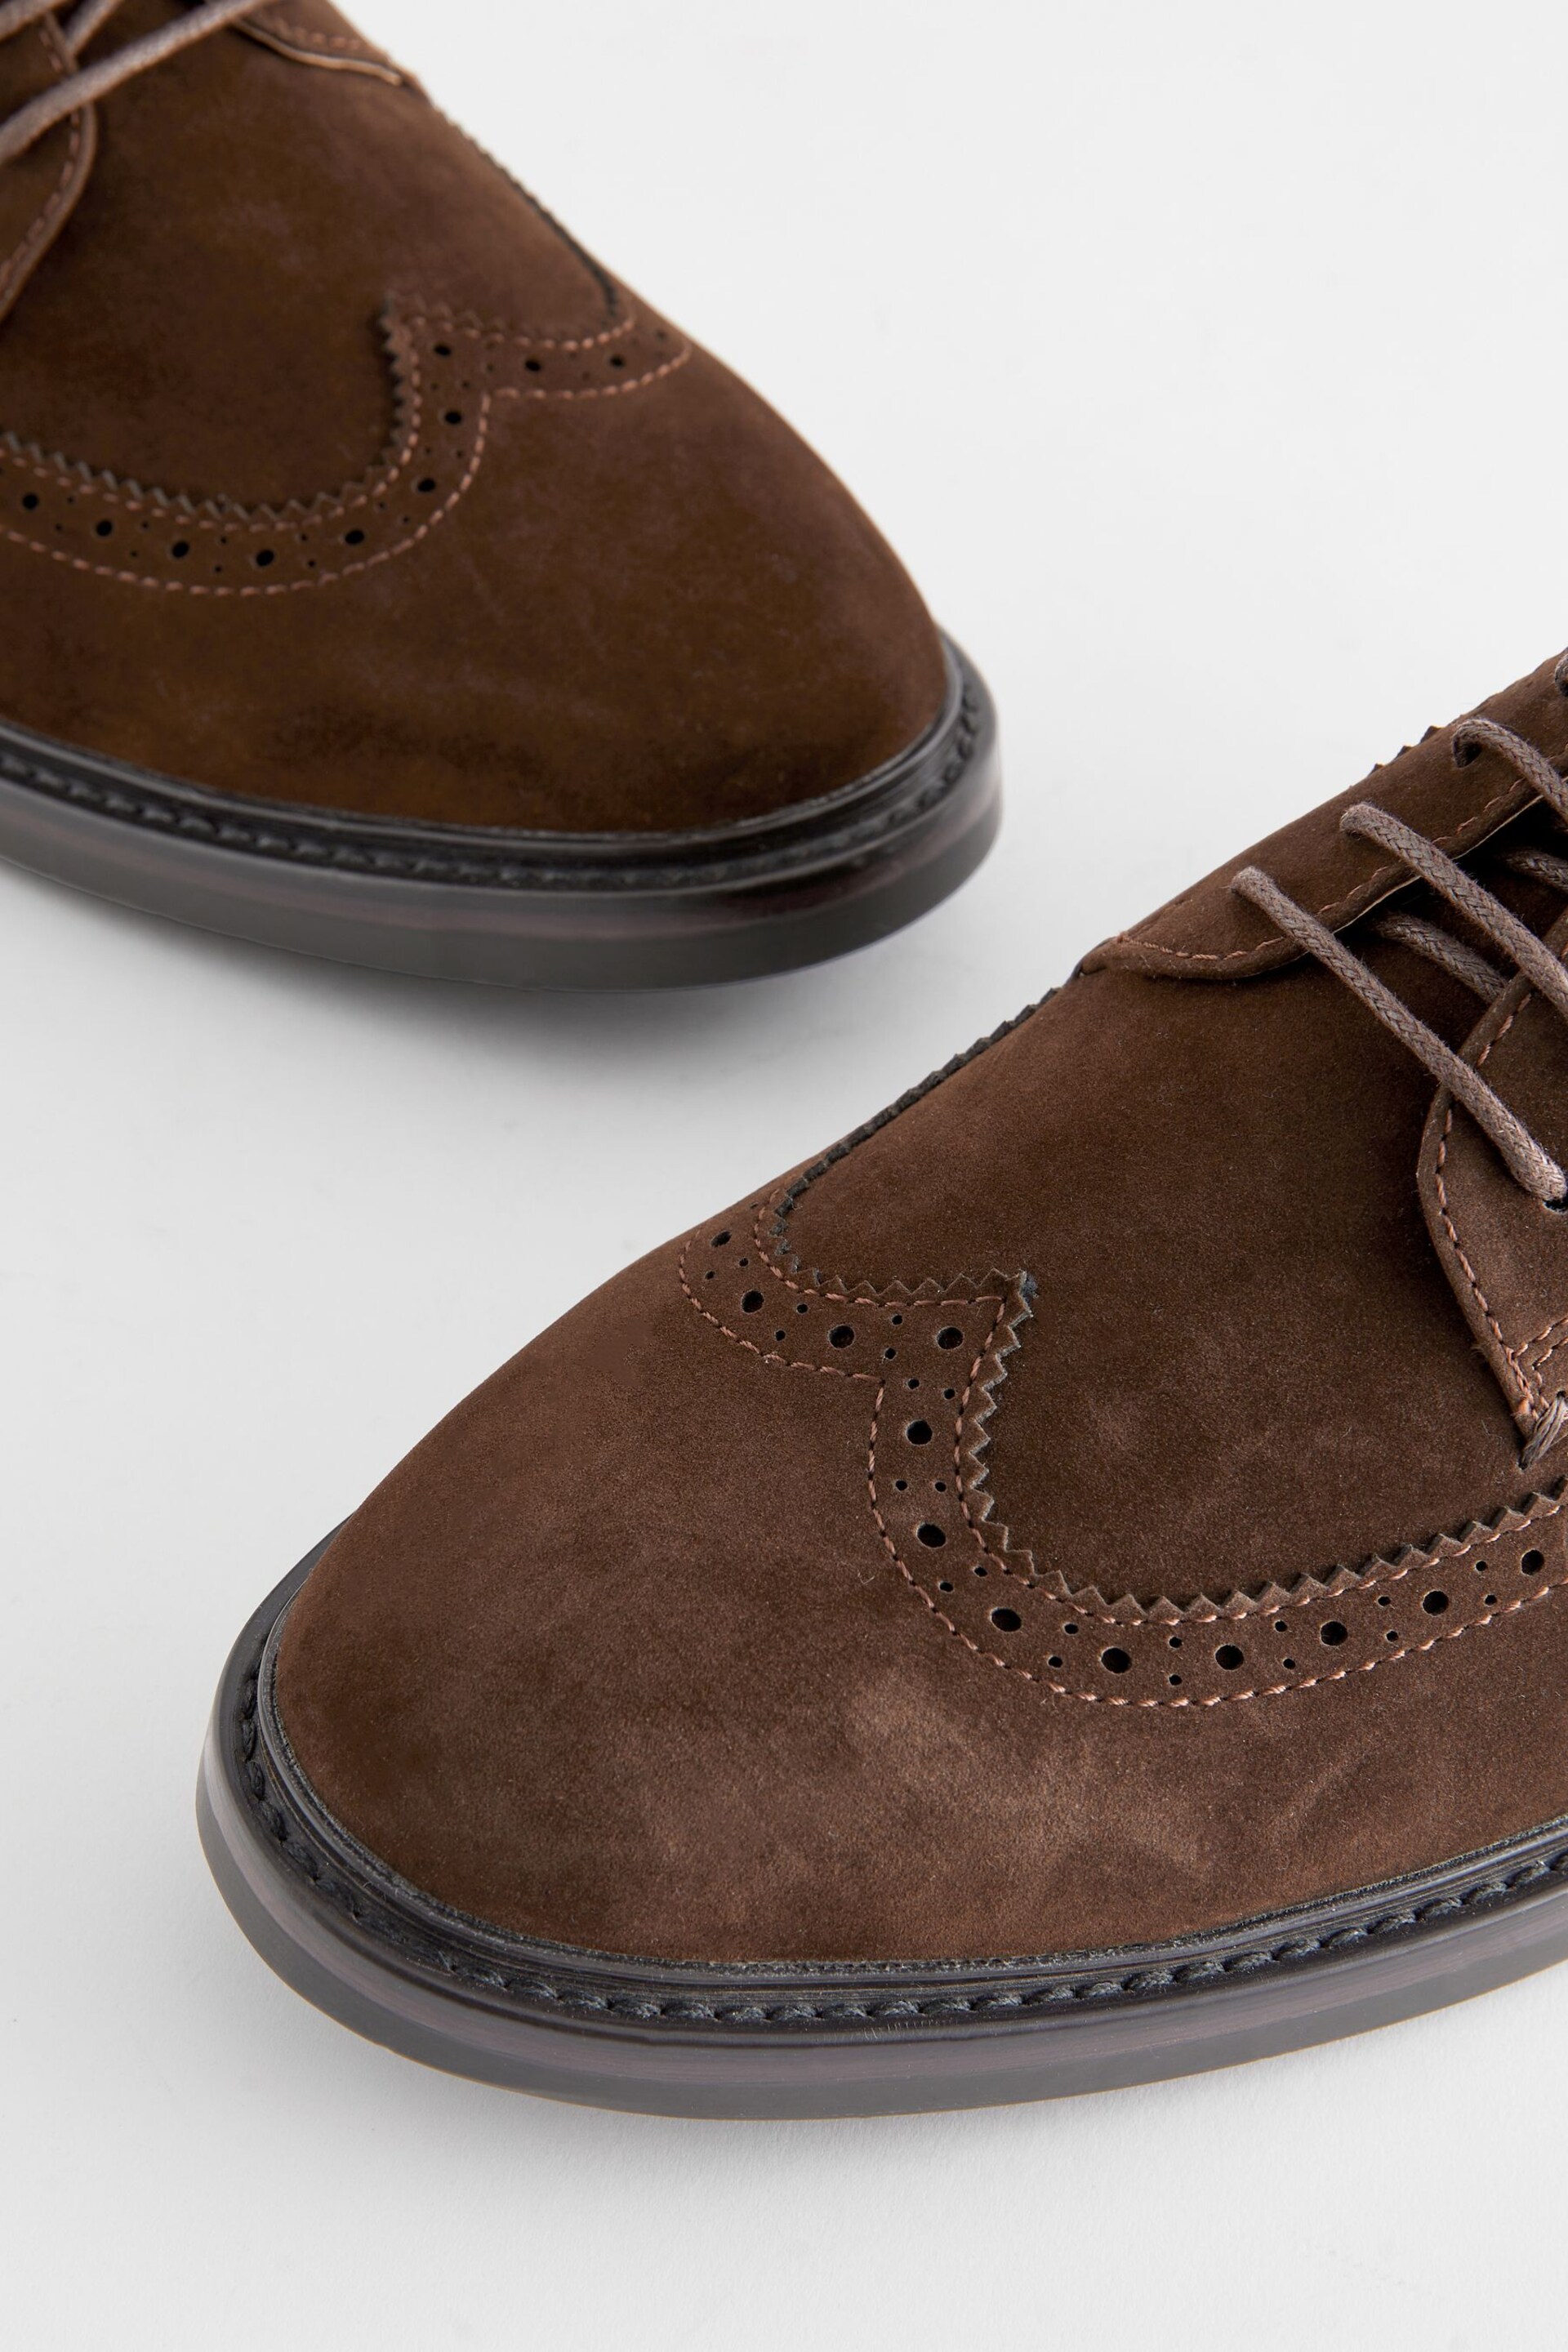 Brown Longwing Brogue Shoes - Image 3 of 5